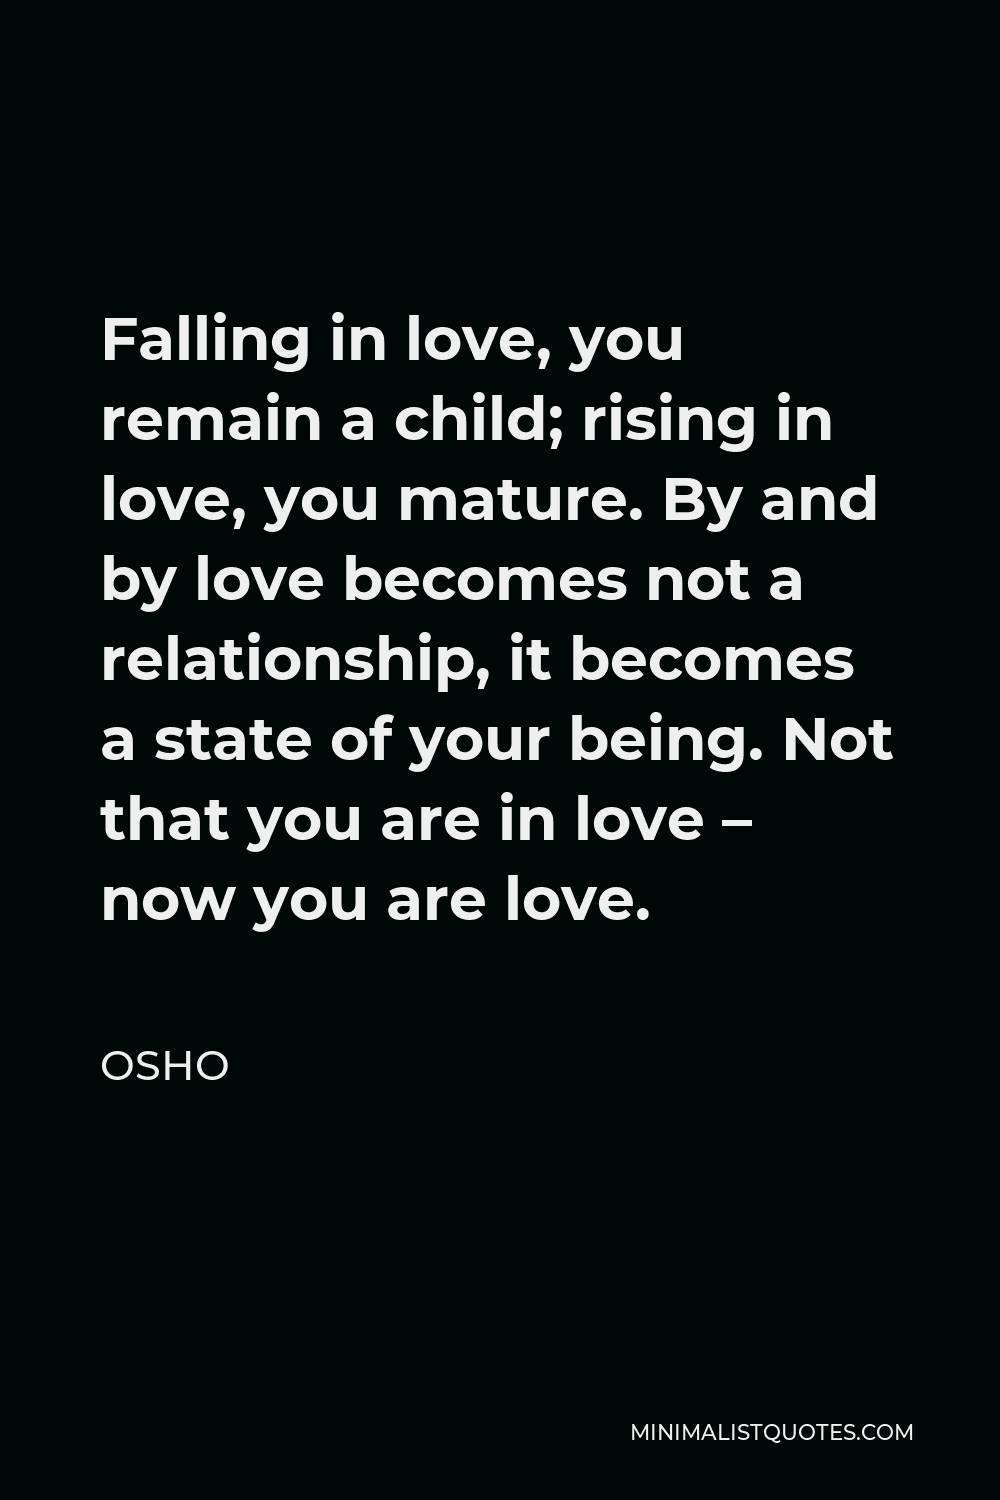 Osho Quote - Falling in love, you remain a child; rising in love, you mature. By and by love becomes not a relationship, it becomes a state of your being. Not that you are in love – now you are love.